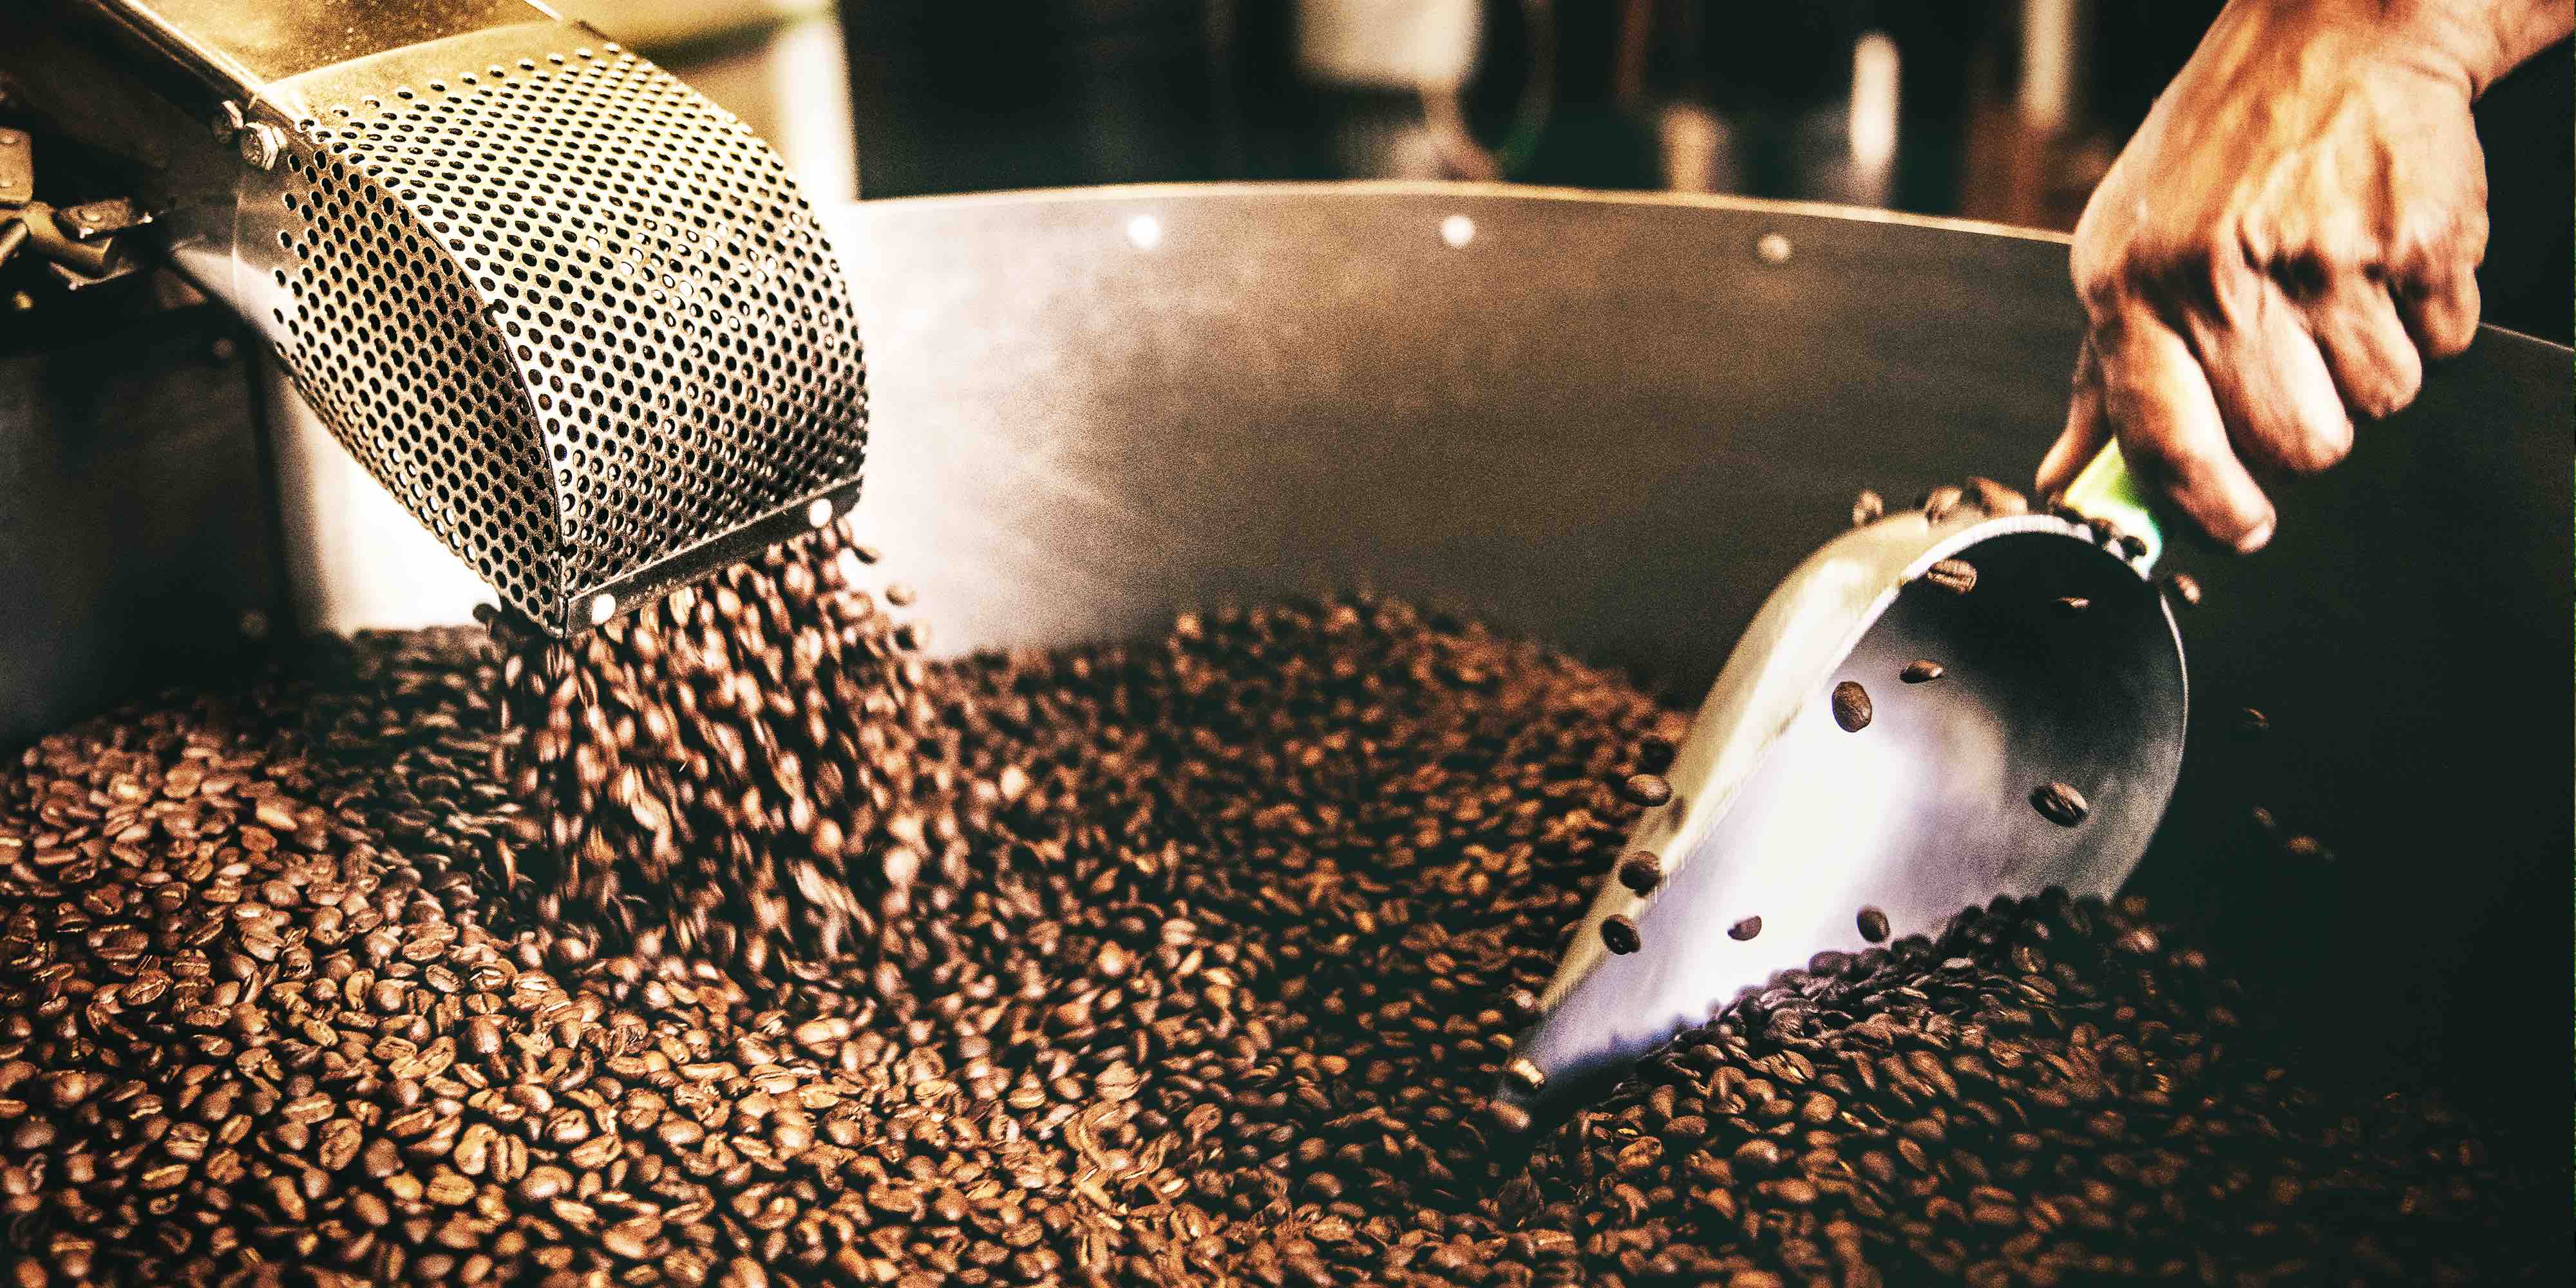 THE SCIENCE OF ROASTING: UNDERSTANDING HOW ROASTING AFFECTS COFFEE FLAVOR